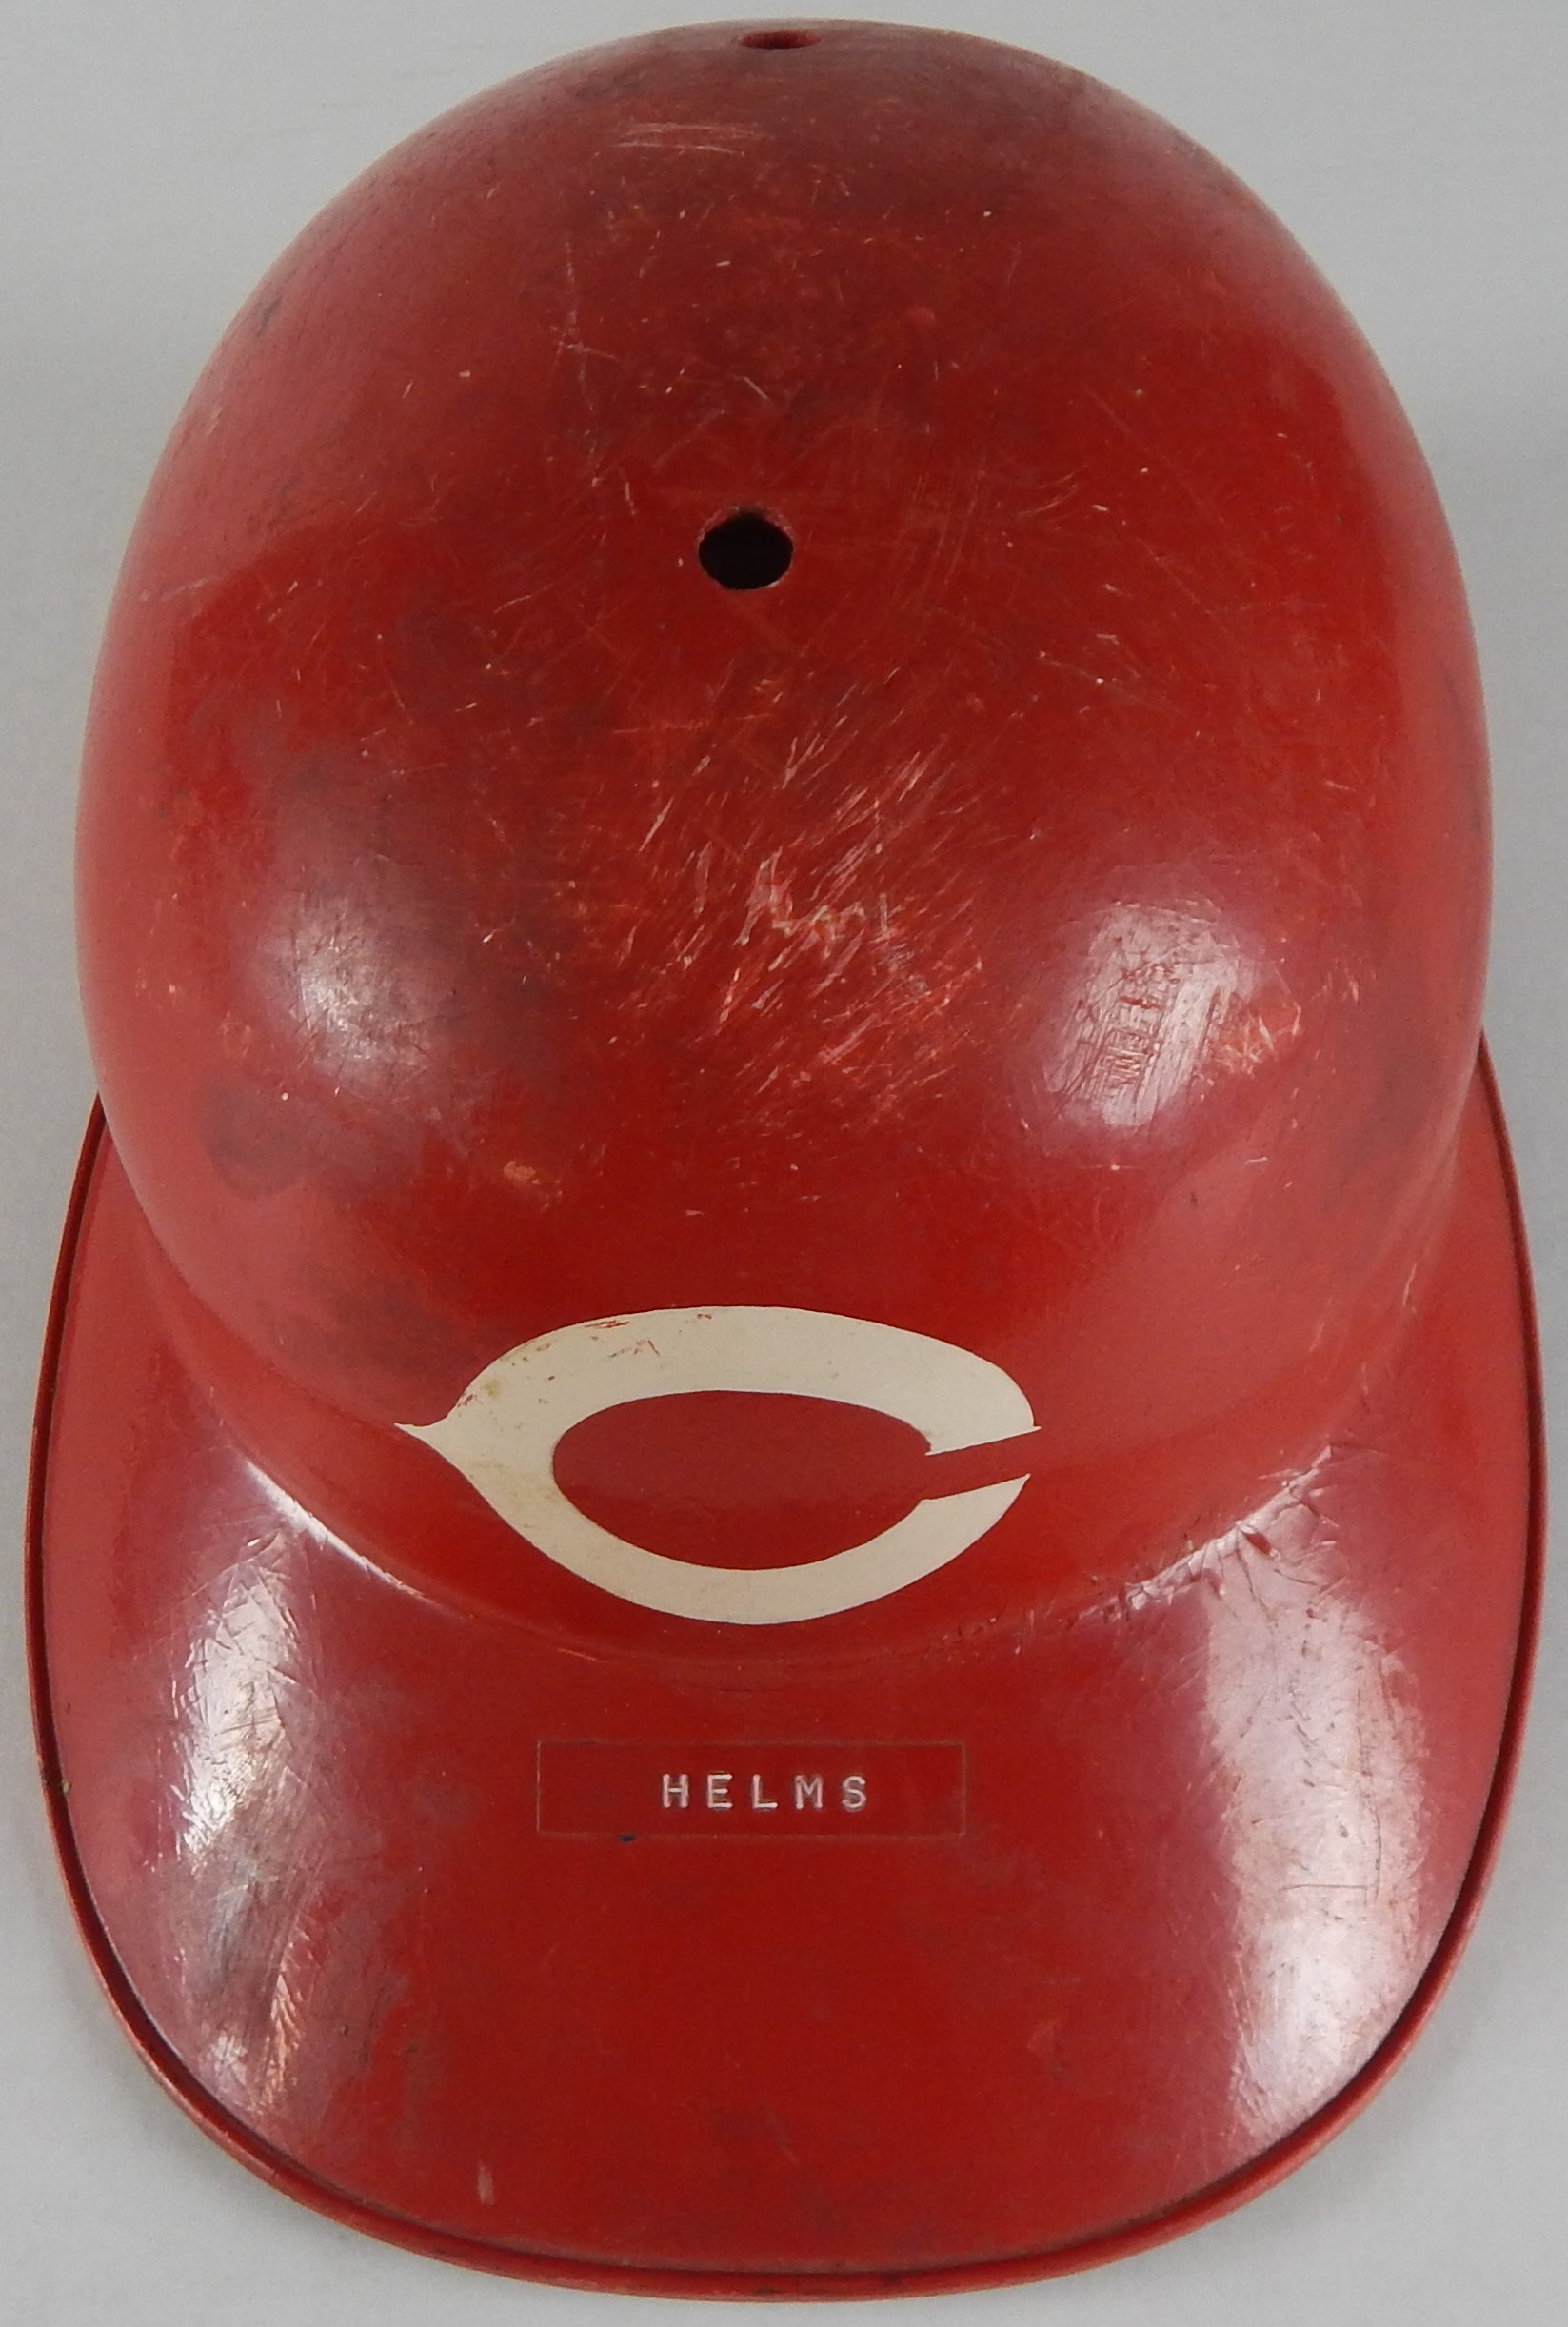 Baseball Equipment - Late 1960s Game Used Tommy Helms Batting Helmet From the Bernie Stowe Collection